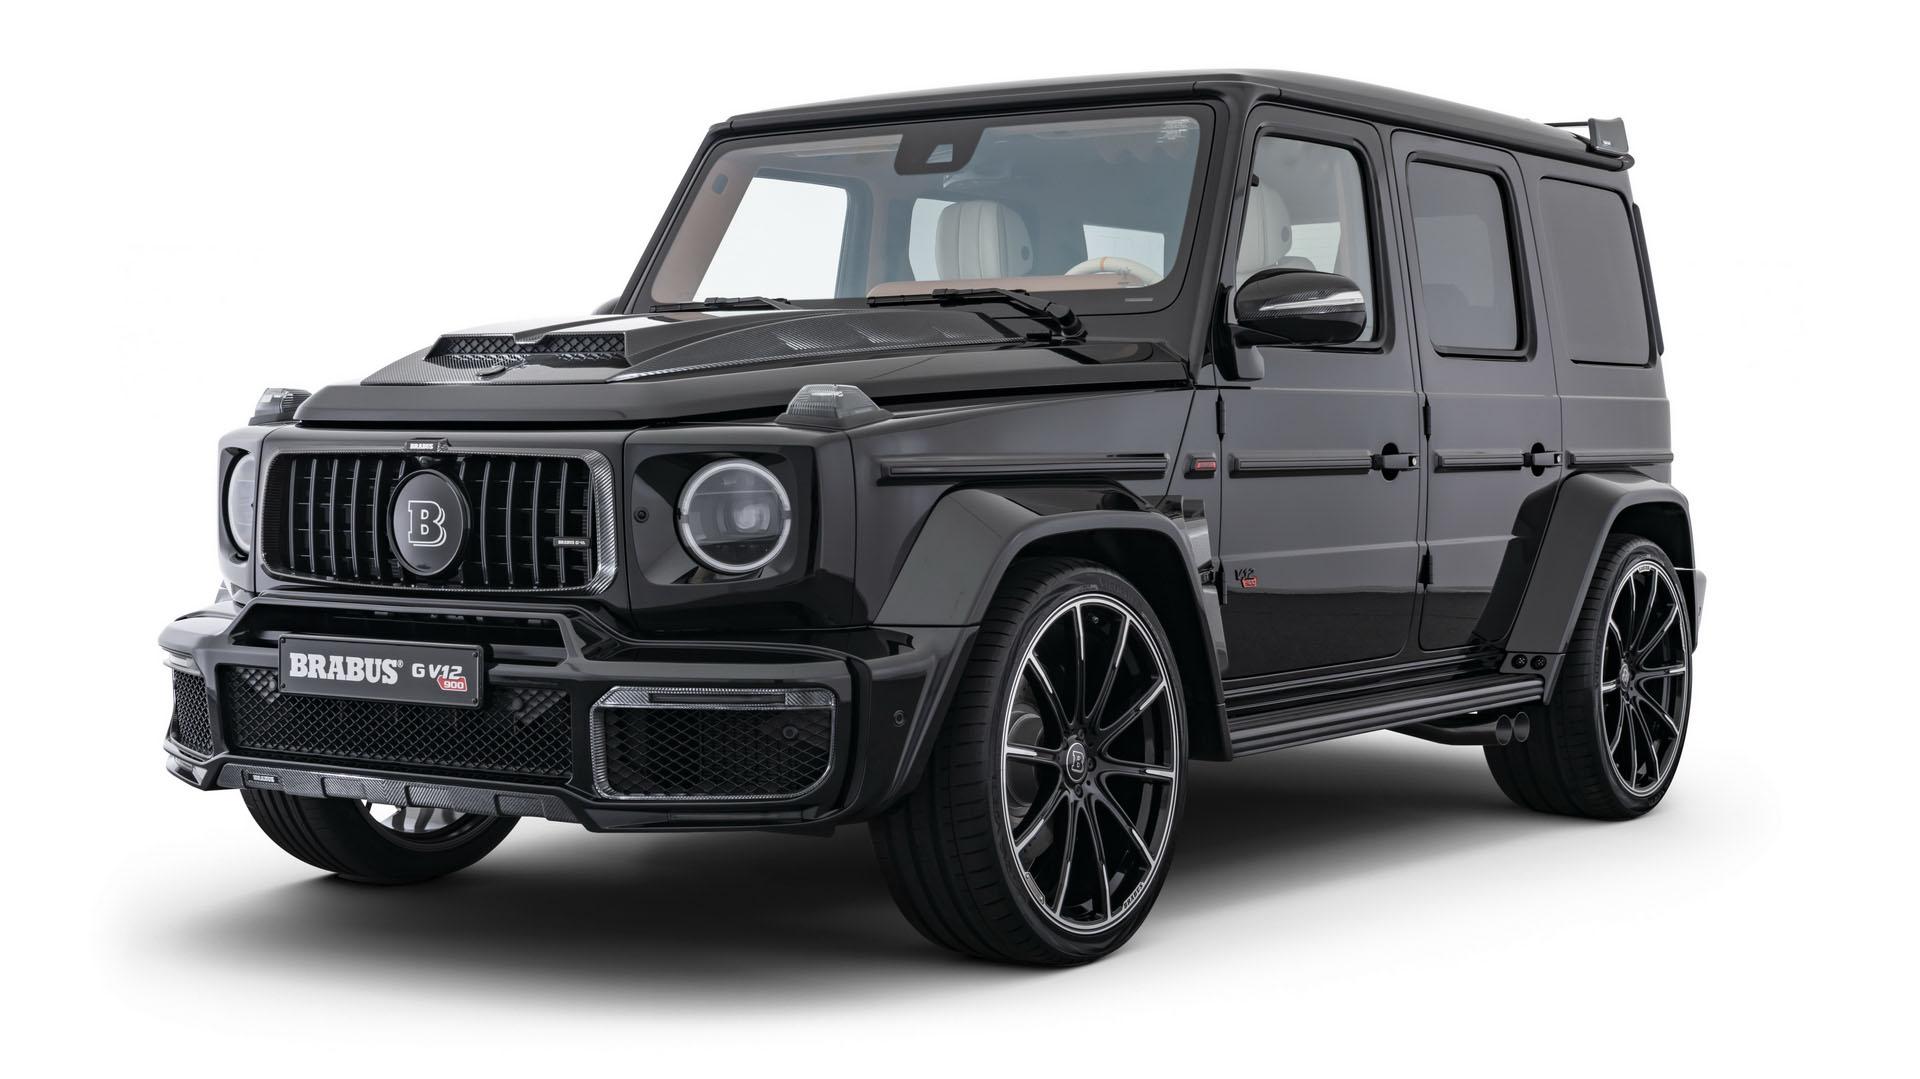 Stand Back This Brabus G Class Has A 888bhp V12 Top Gear